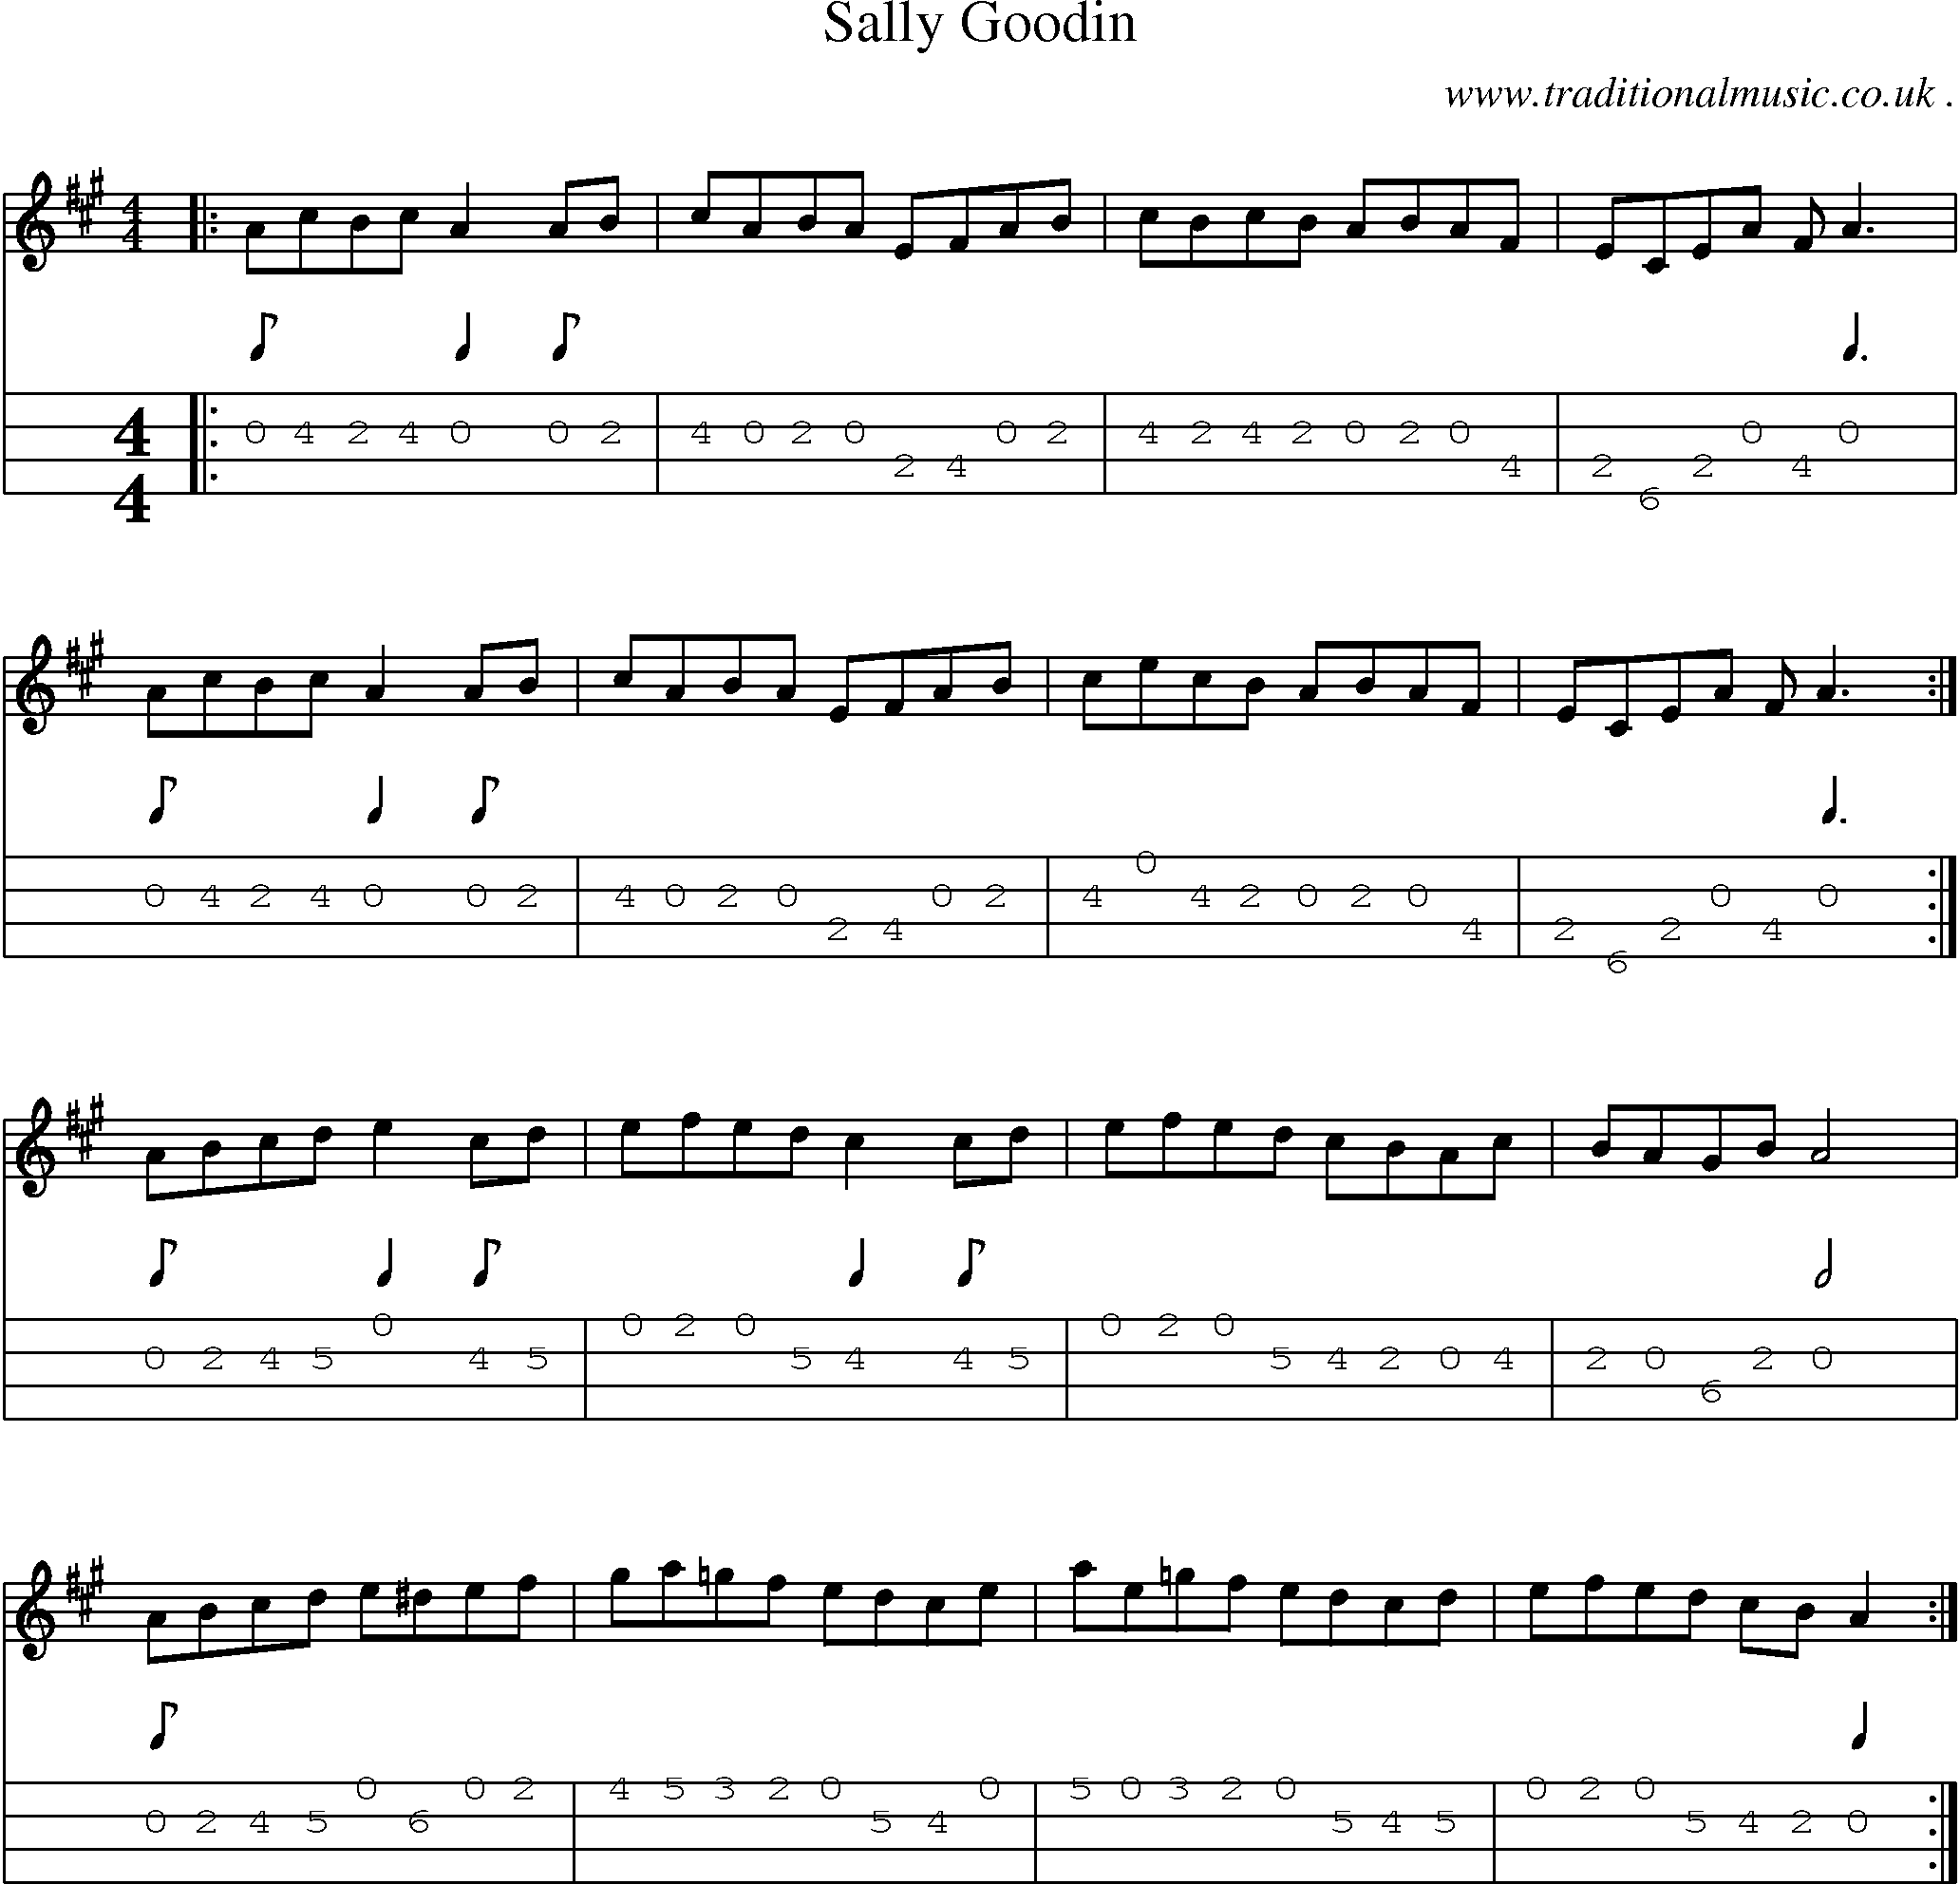 Music Score and Mandolin Tabs for Sally Goodin